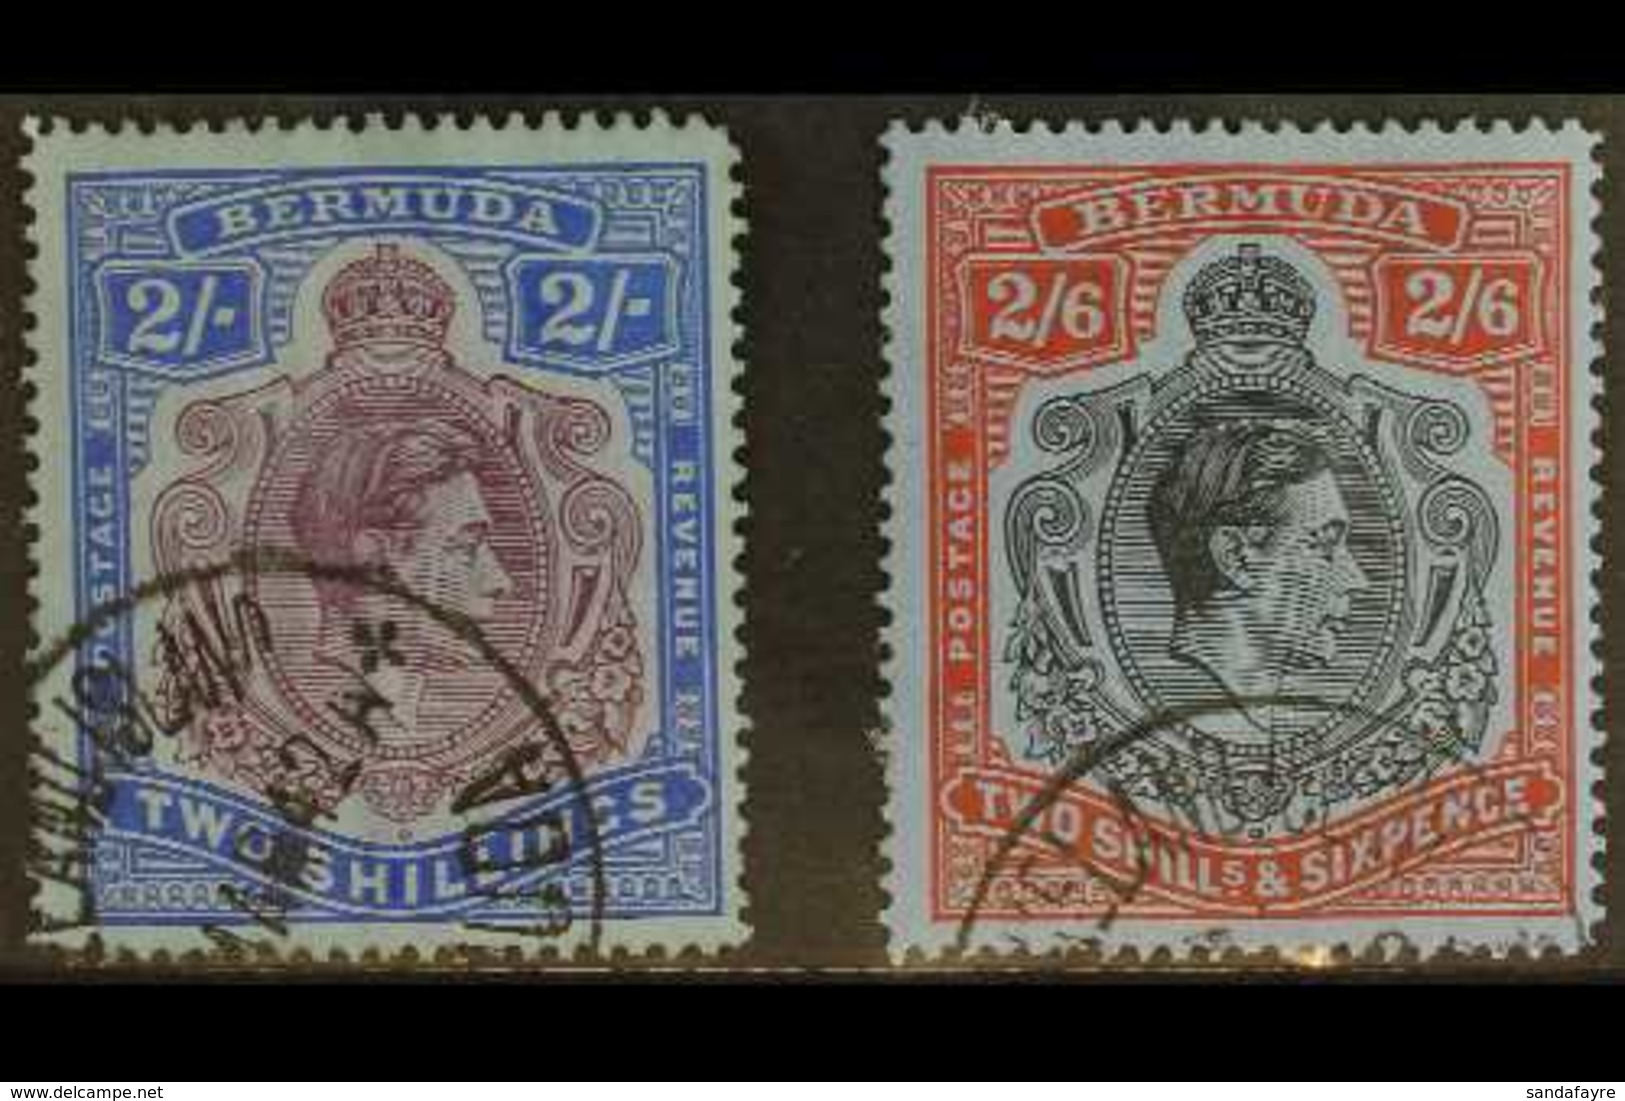 1941-42 LINE PERF 2s And 2s.6d, SG 116b & 117a, Each With Ireland Island 1942 Cds. (2 Stamps) For More Images, Please Vi - Bermuda